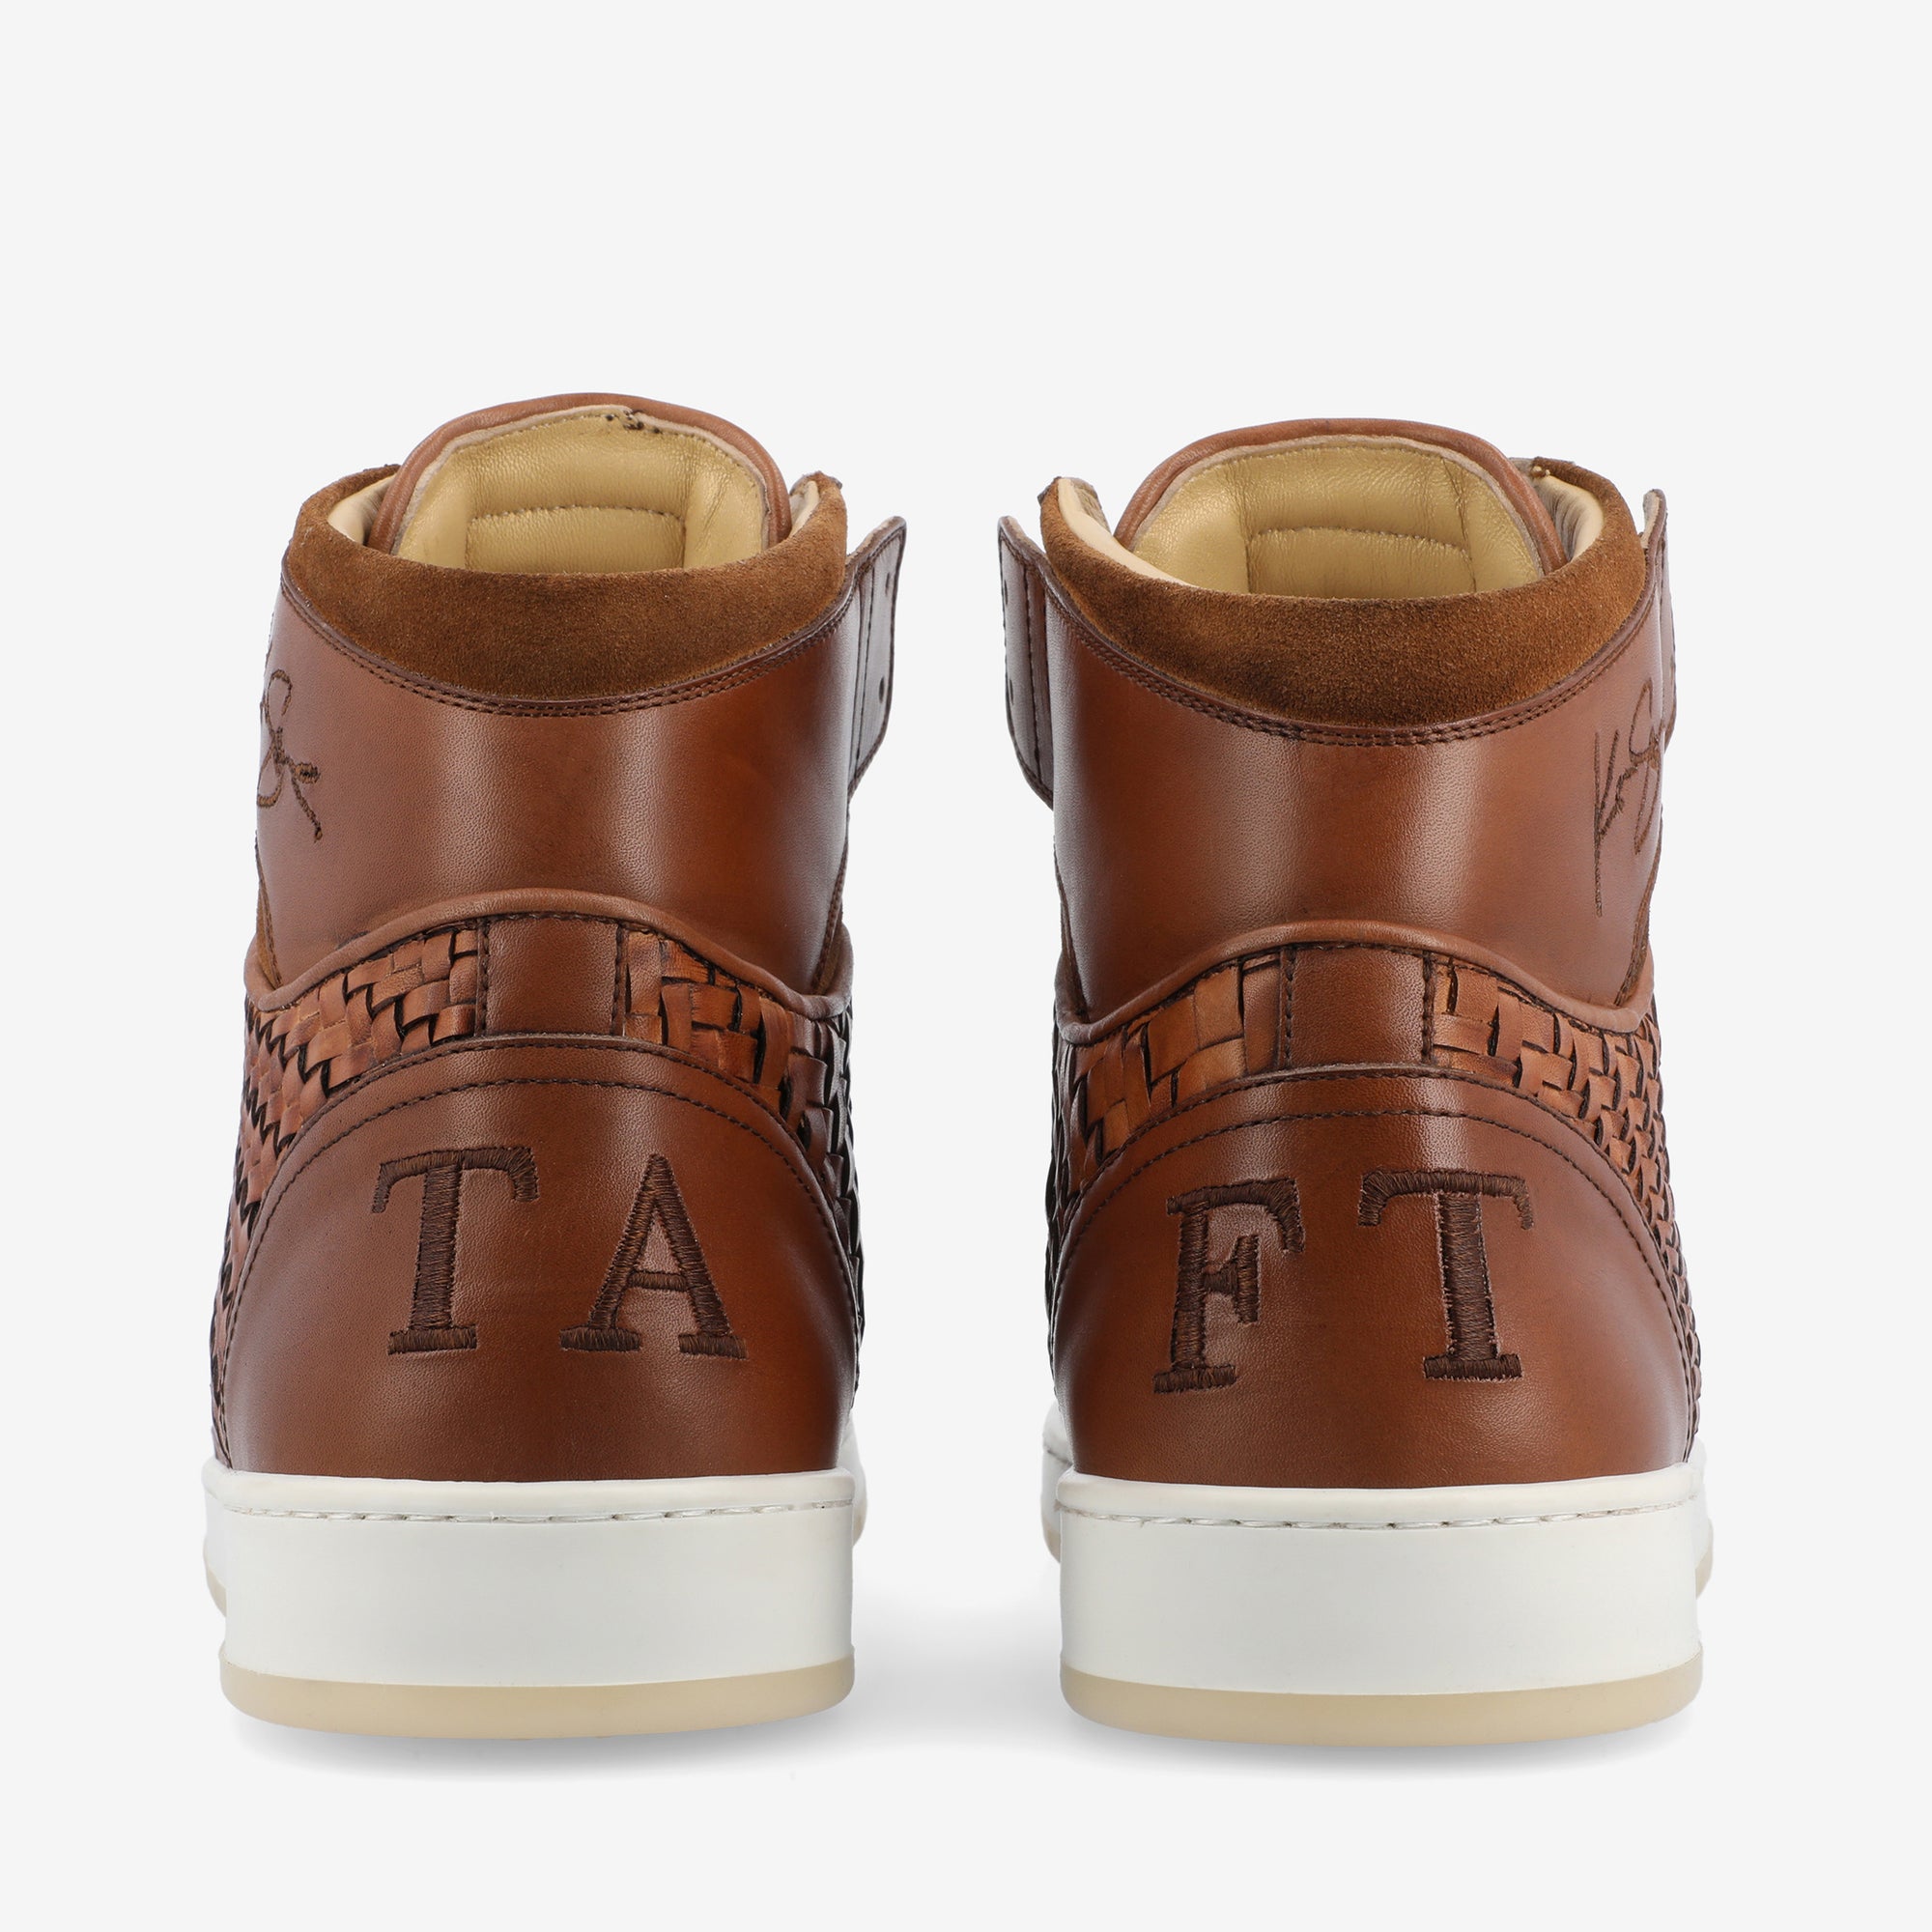 The Rapido High-top Sneaker in Brown Woven (Last Chance, Final Sale)